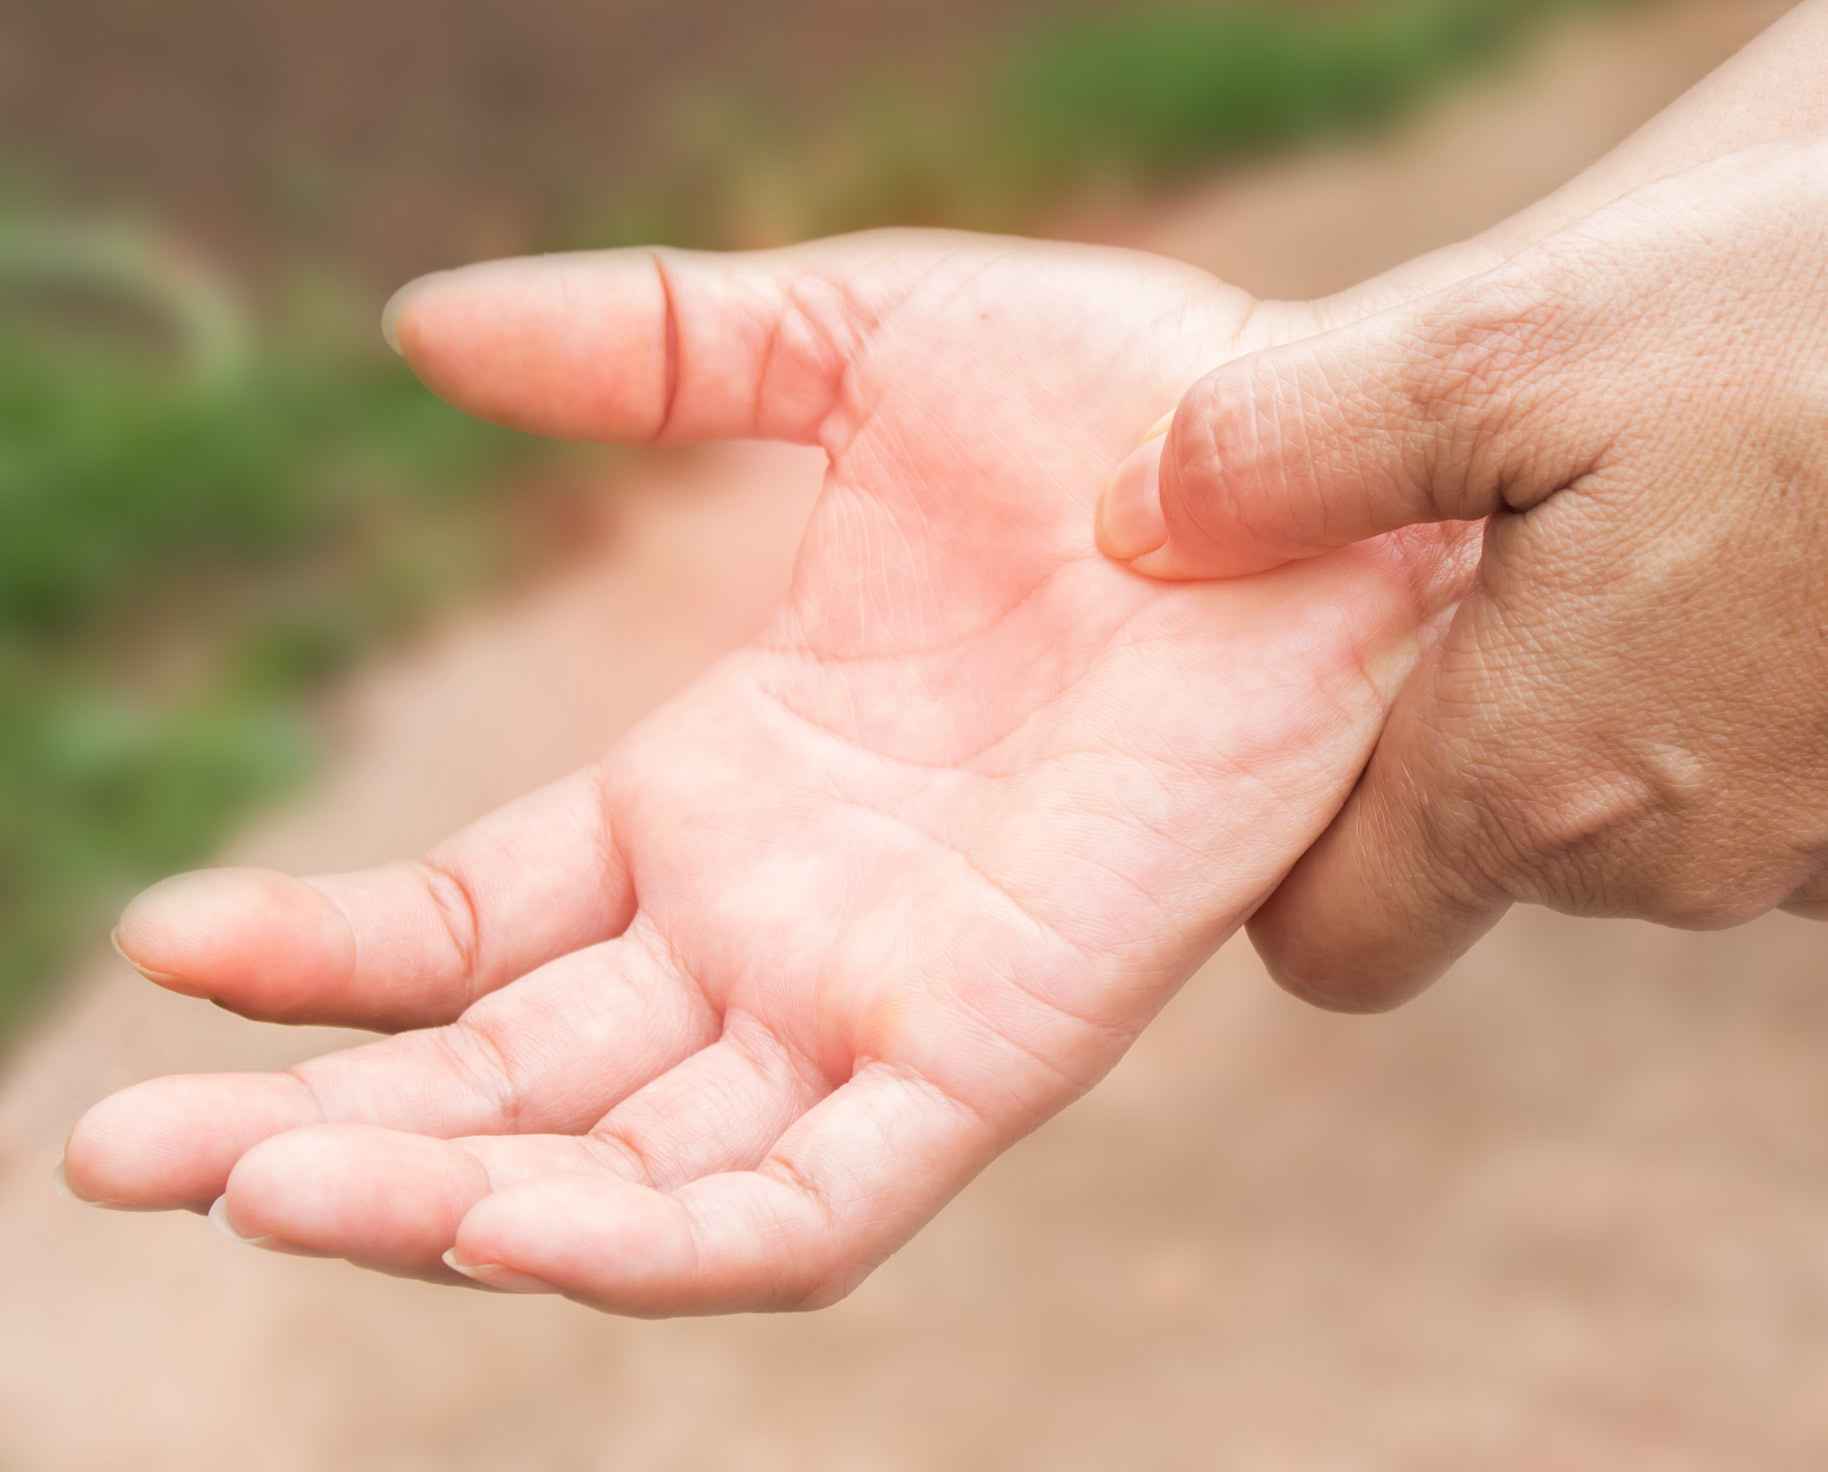 Hand with Carpal Tunnel Syndrome - Boise Plastic Surgery and Hand Center